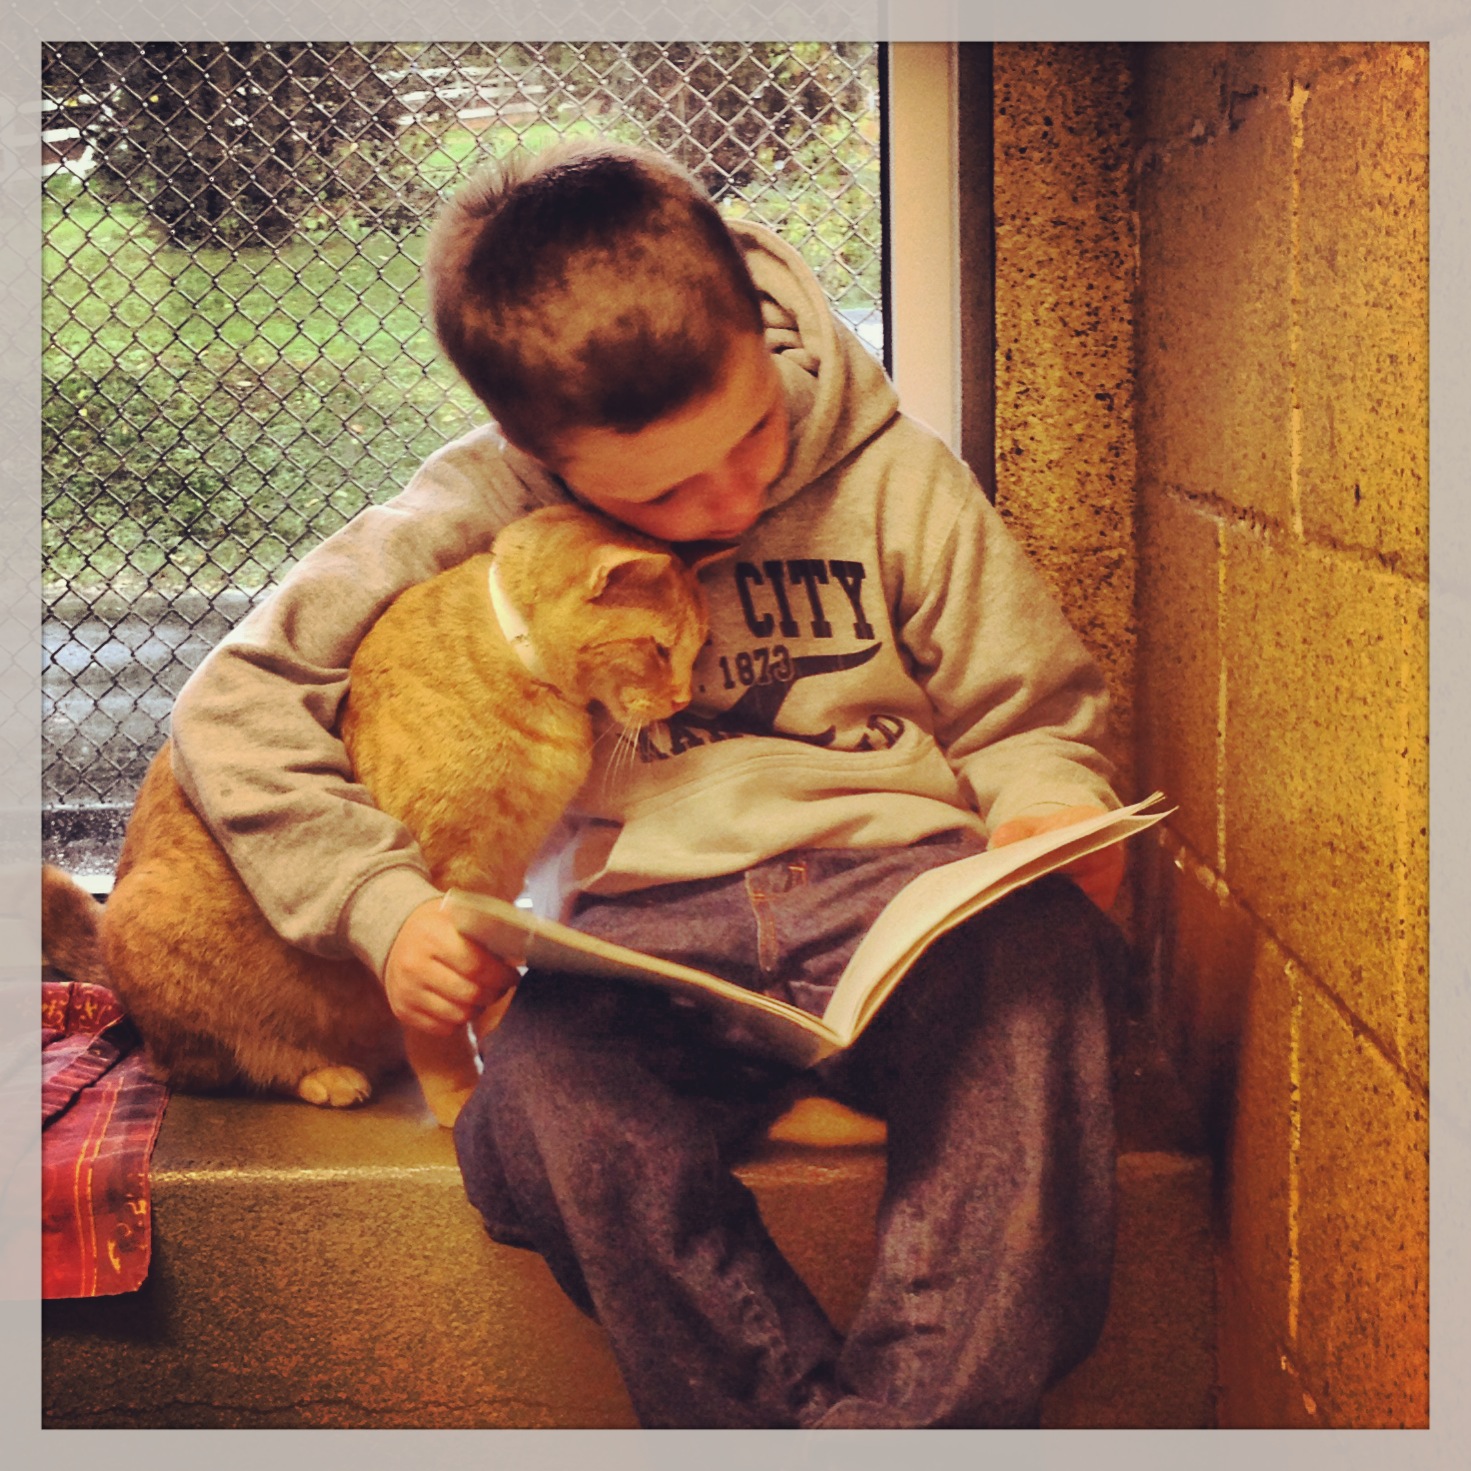 My+local+rescue+has+a+program+called+Book+Buddies+where+kids+read+to+sheltered+cats+to+sooth+them